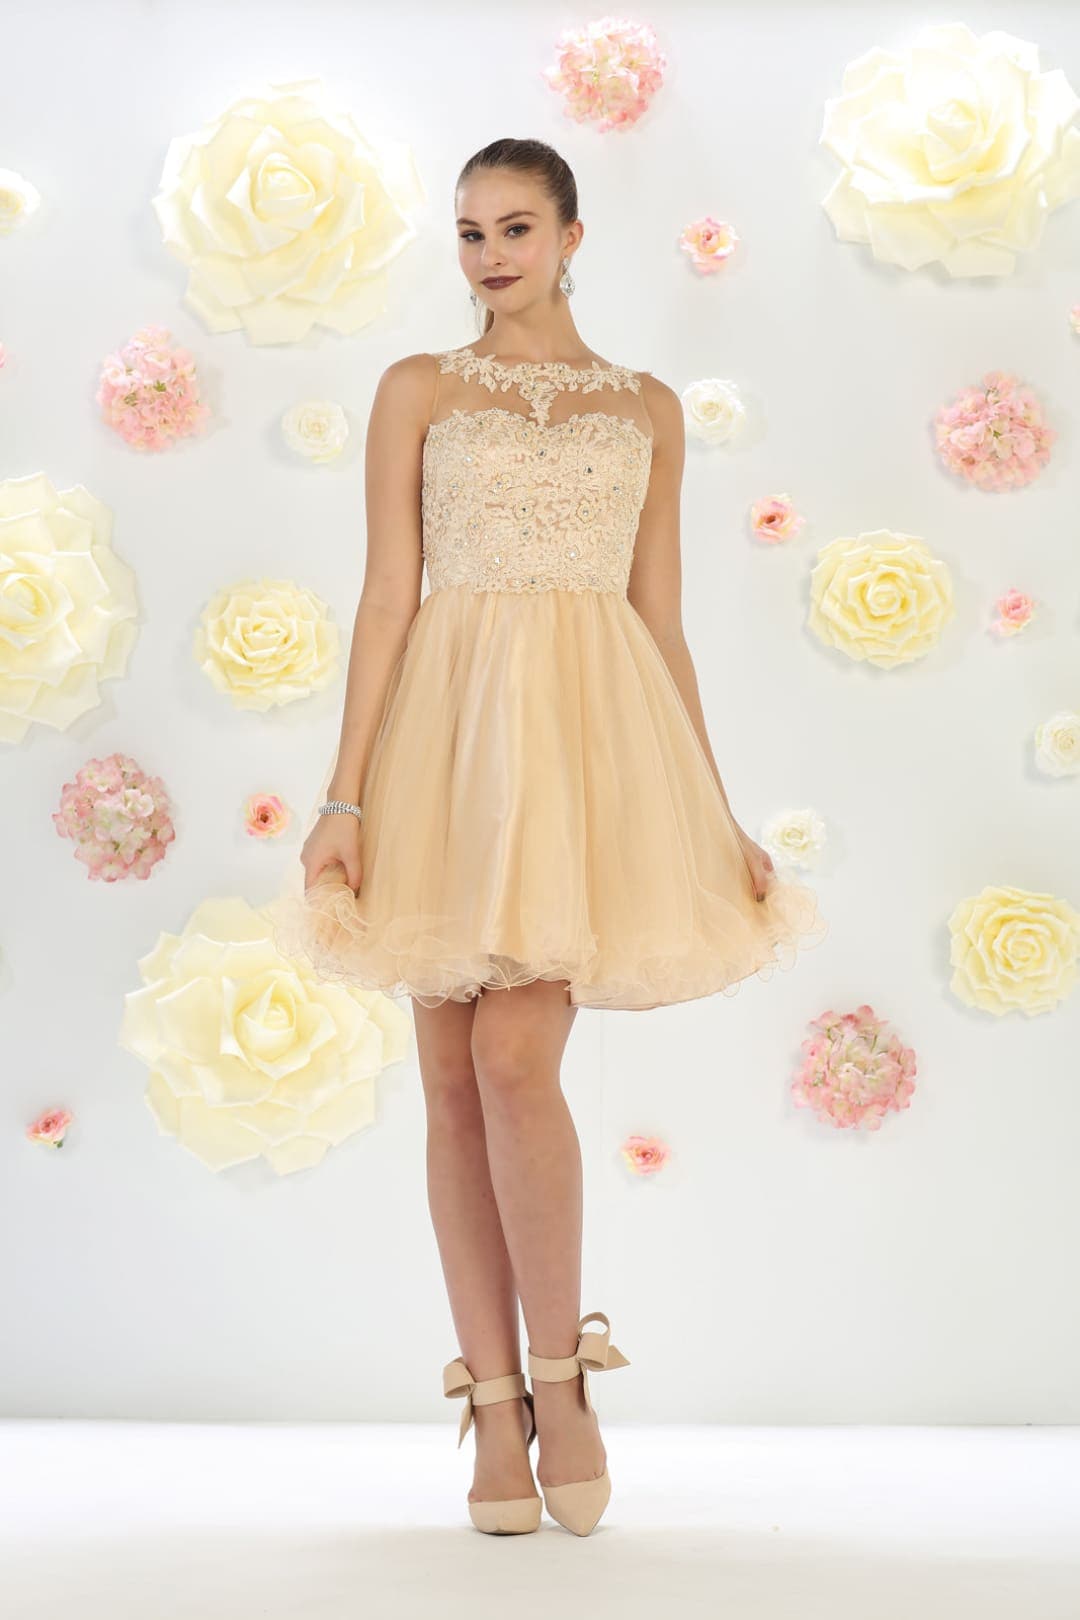 May Queen MQ1429 Sleeveless Sheer Embroidered Bodice Short Cocktail Dress - Champagne / 20